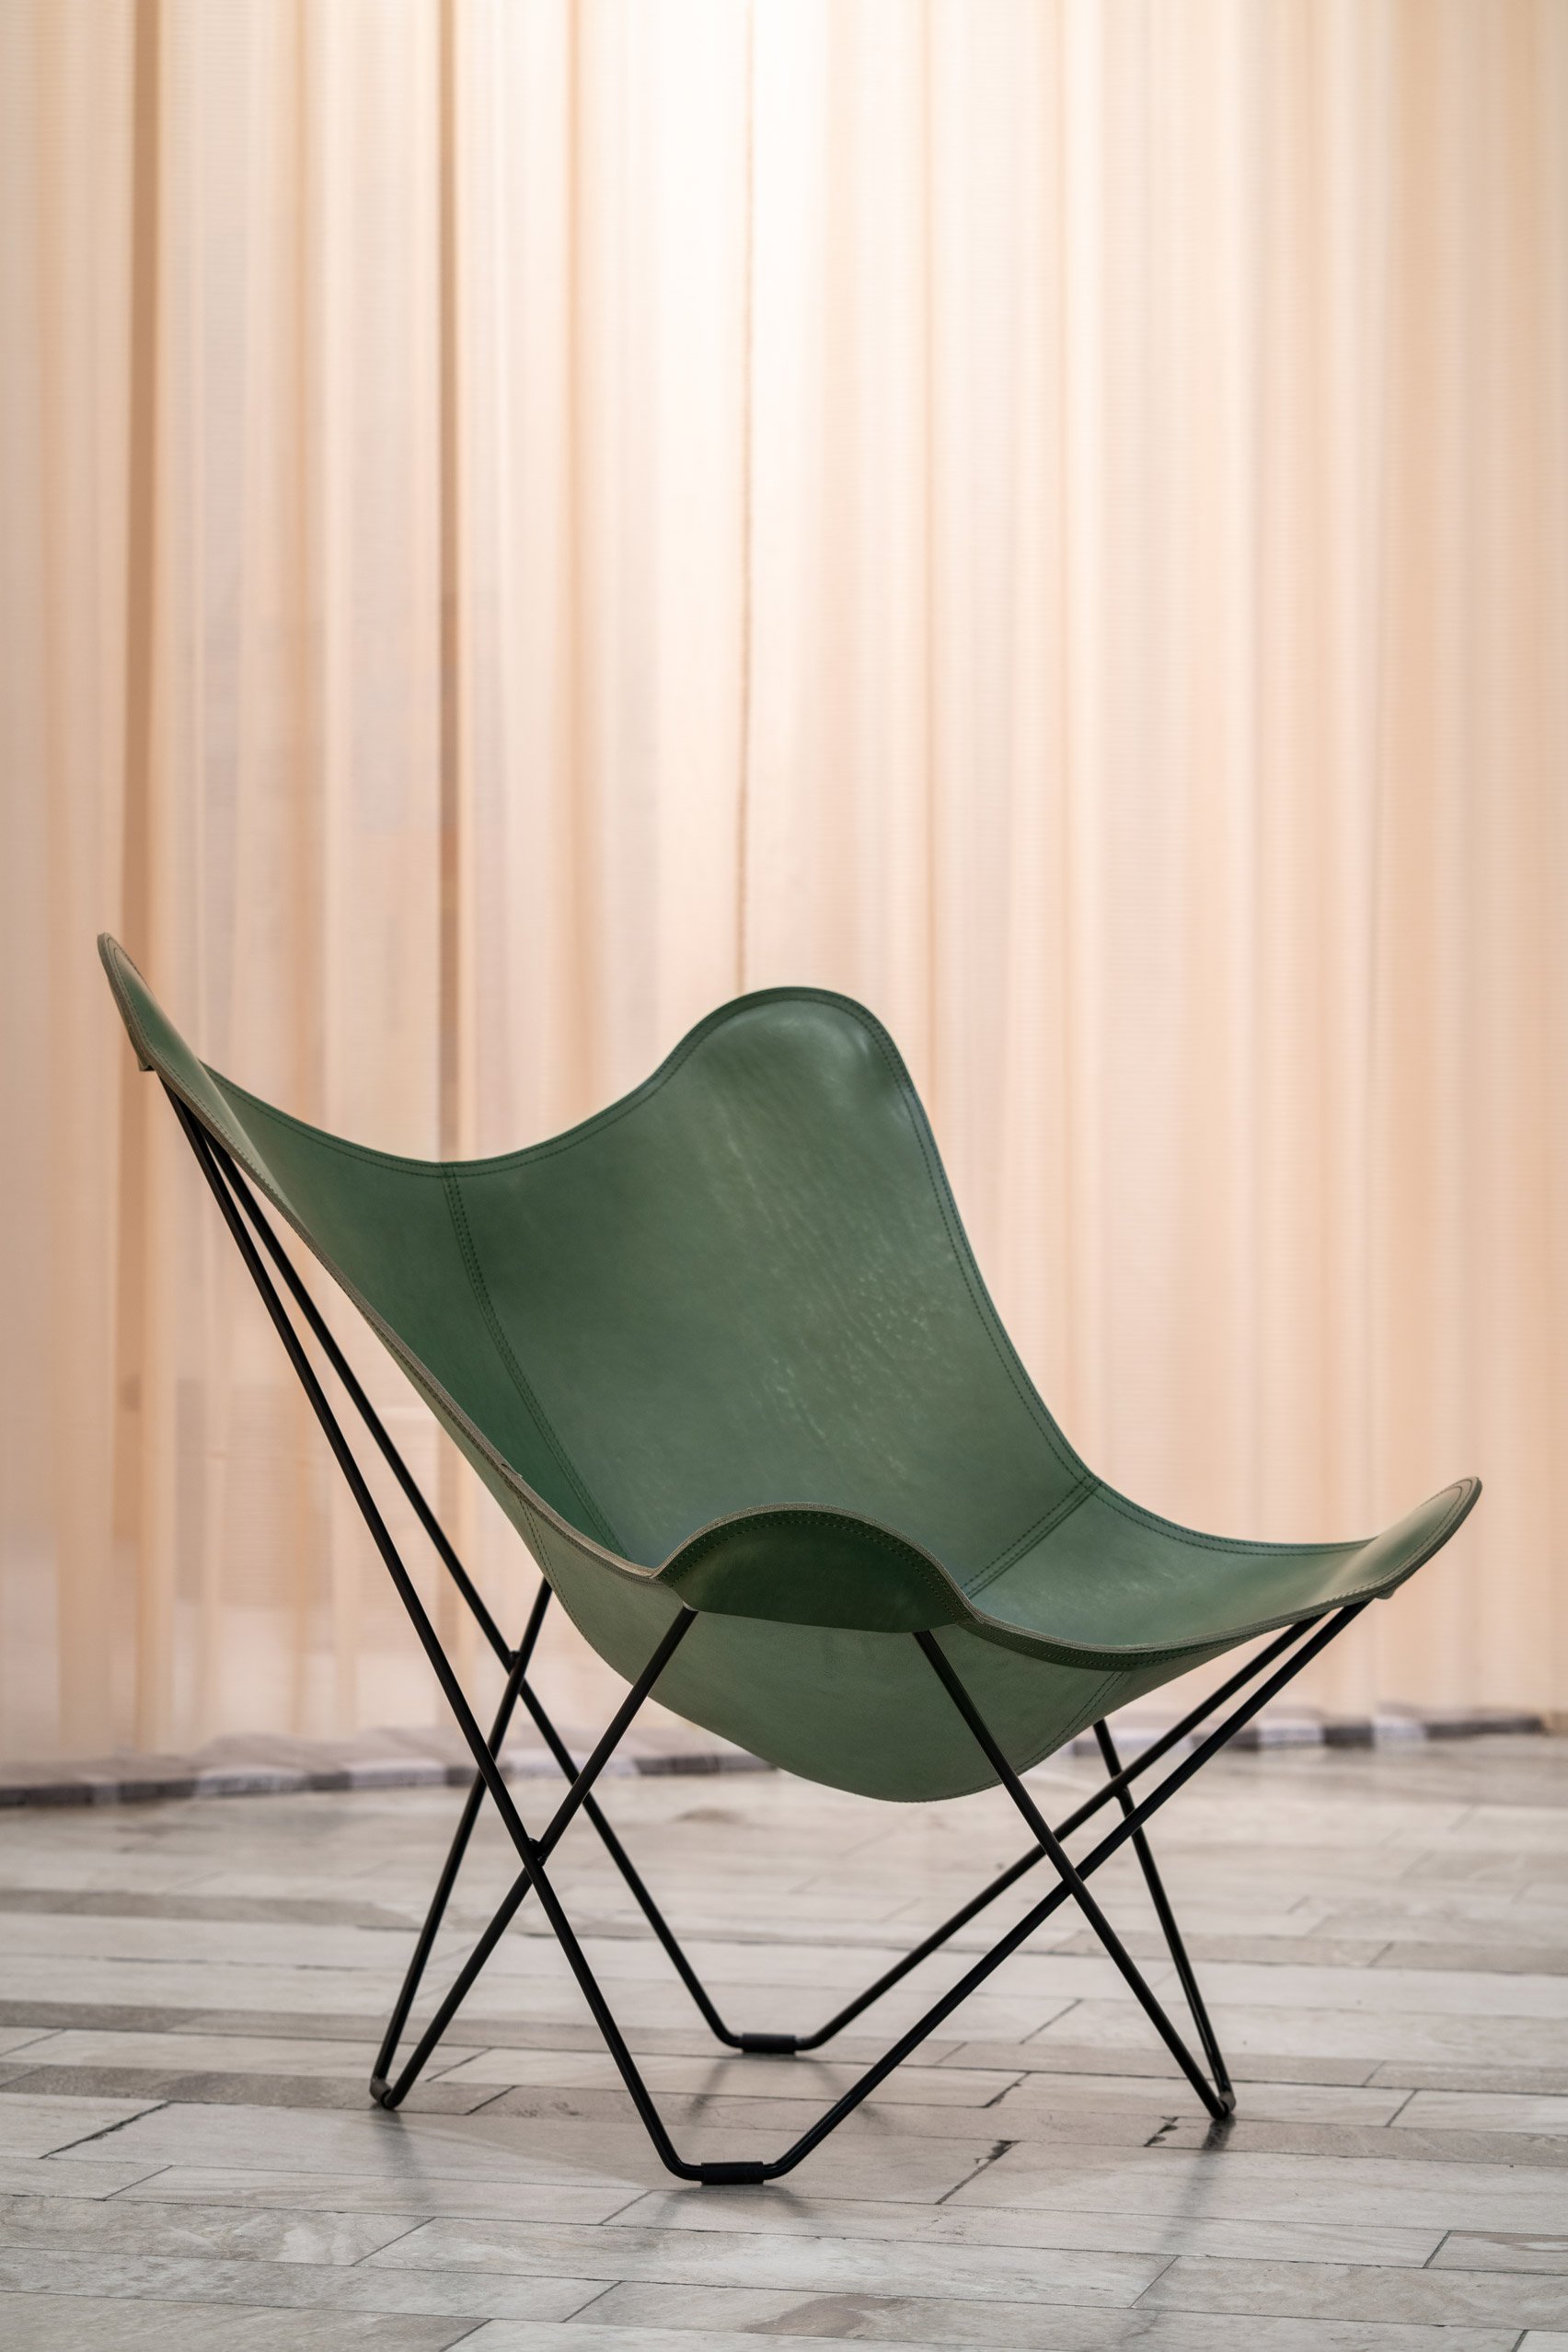 A green leather butterfly chair with a black frame